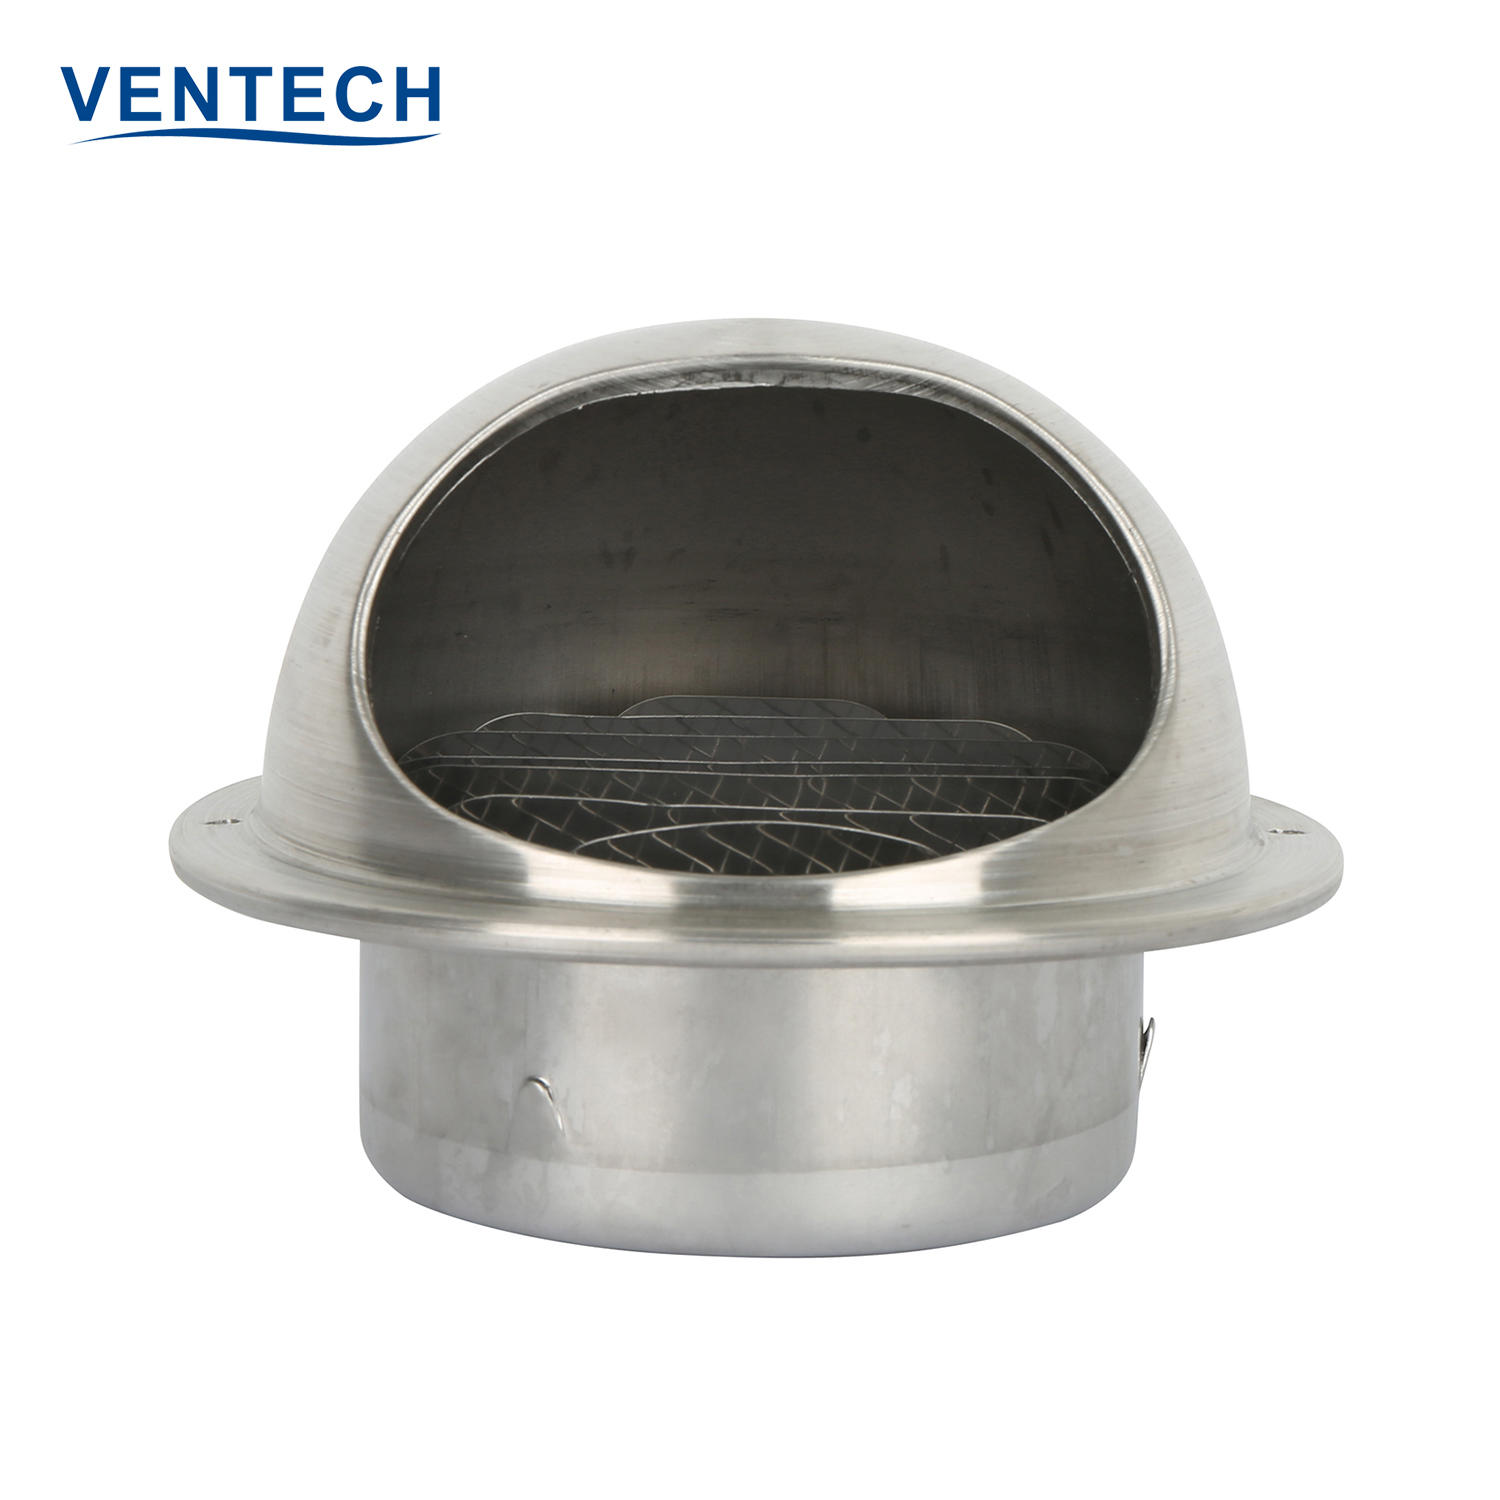 VENTECH Air Vent Cover Stainless Steel Ball Weather Louver For Hvac Ventilation